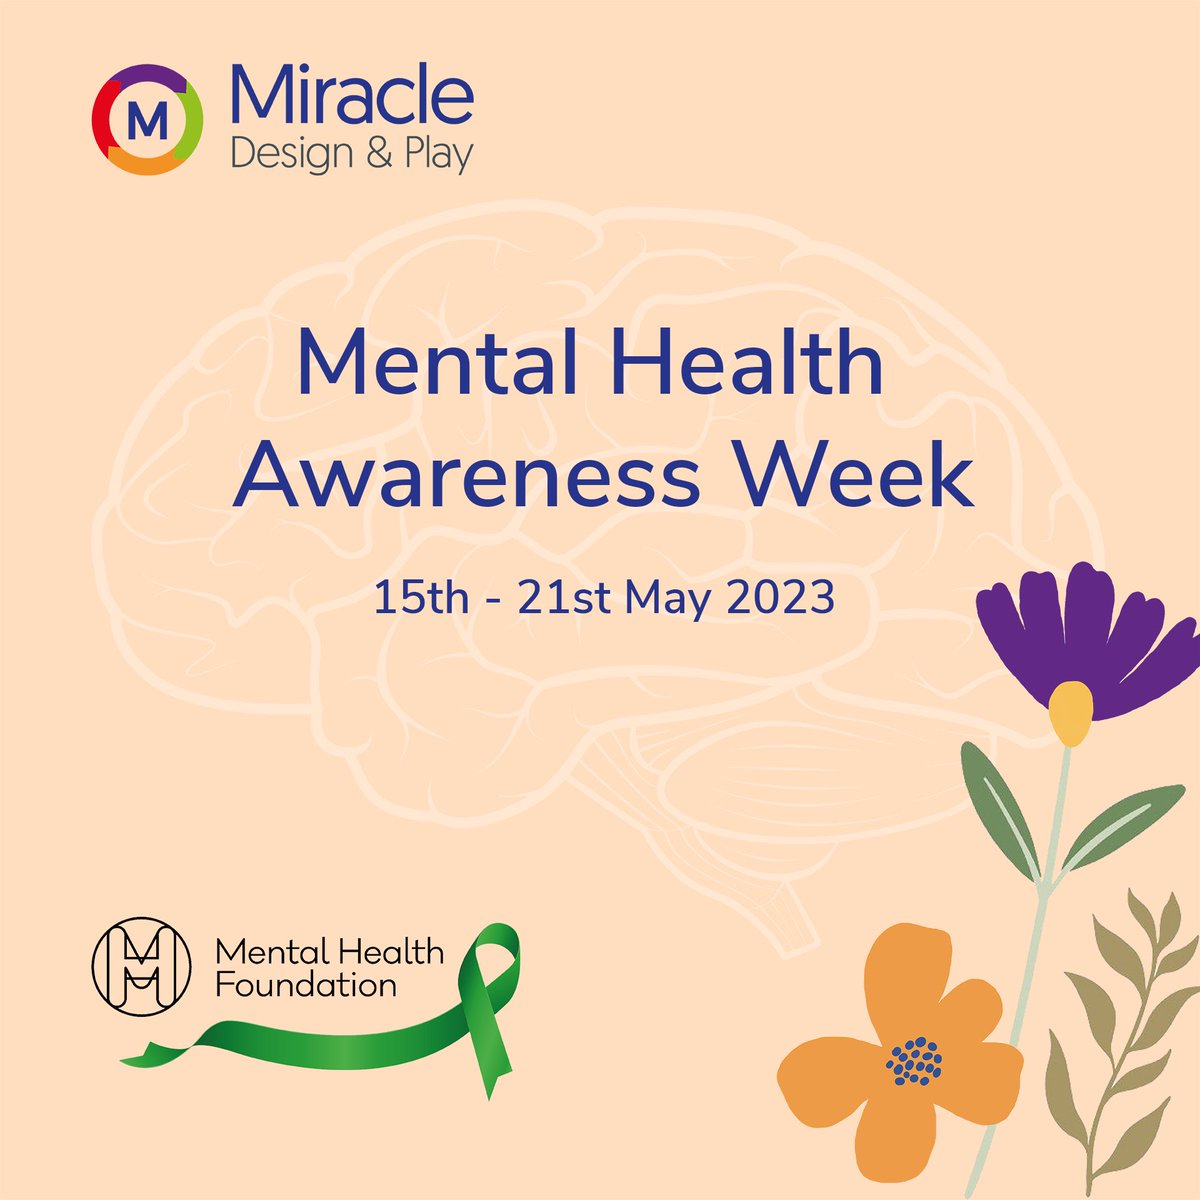 IT'S MENTAL HEALTH AWARENESS WEEK! 💚

Good mental health enables us to thrive as individuals and as a business. 

#mentalhealthawarenessweek #mentalhealth #positivemind #healthy #tohelpmyanixety #healthyworkplace #mentalmatters #mentalhealthfoundation